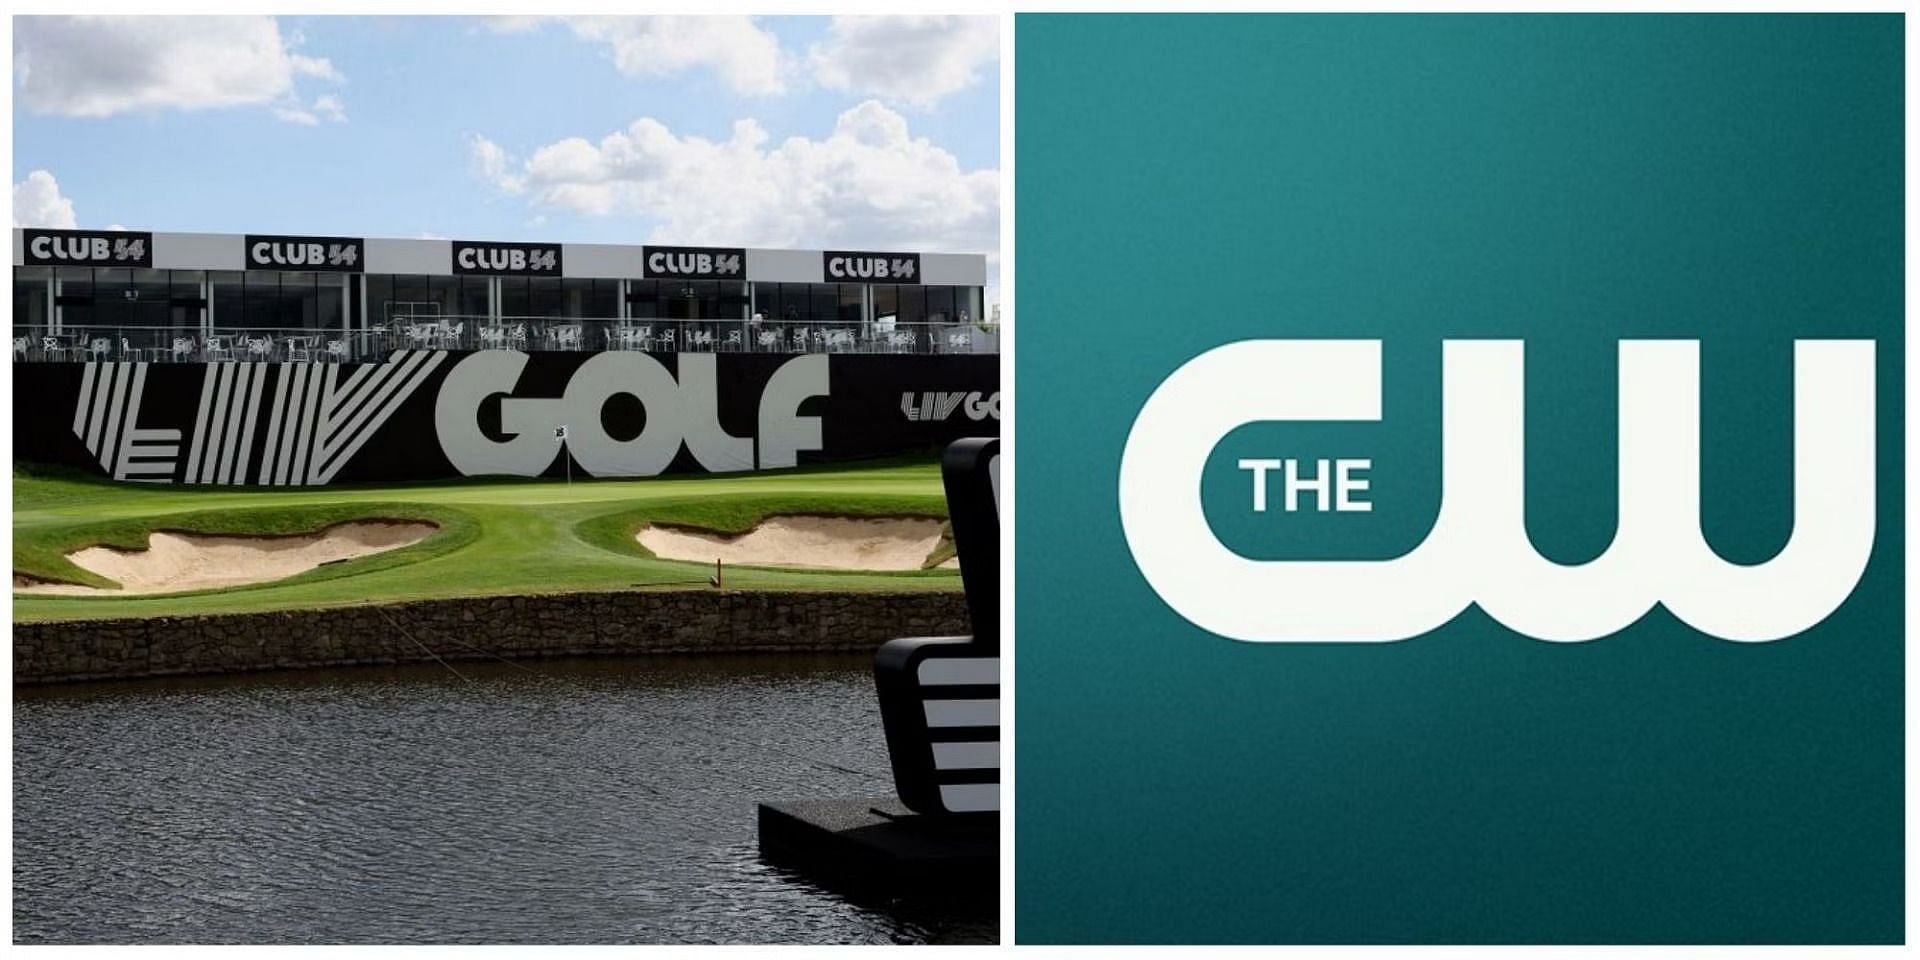 LIV Golf has signed a deal with CW to telecast its events across the United States